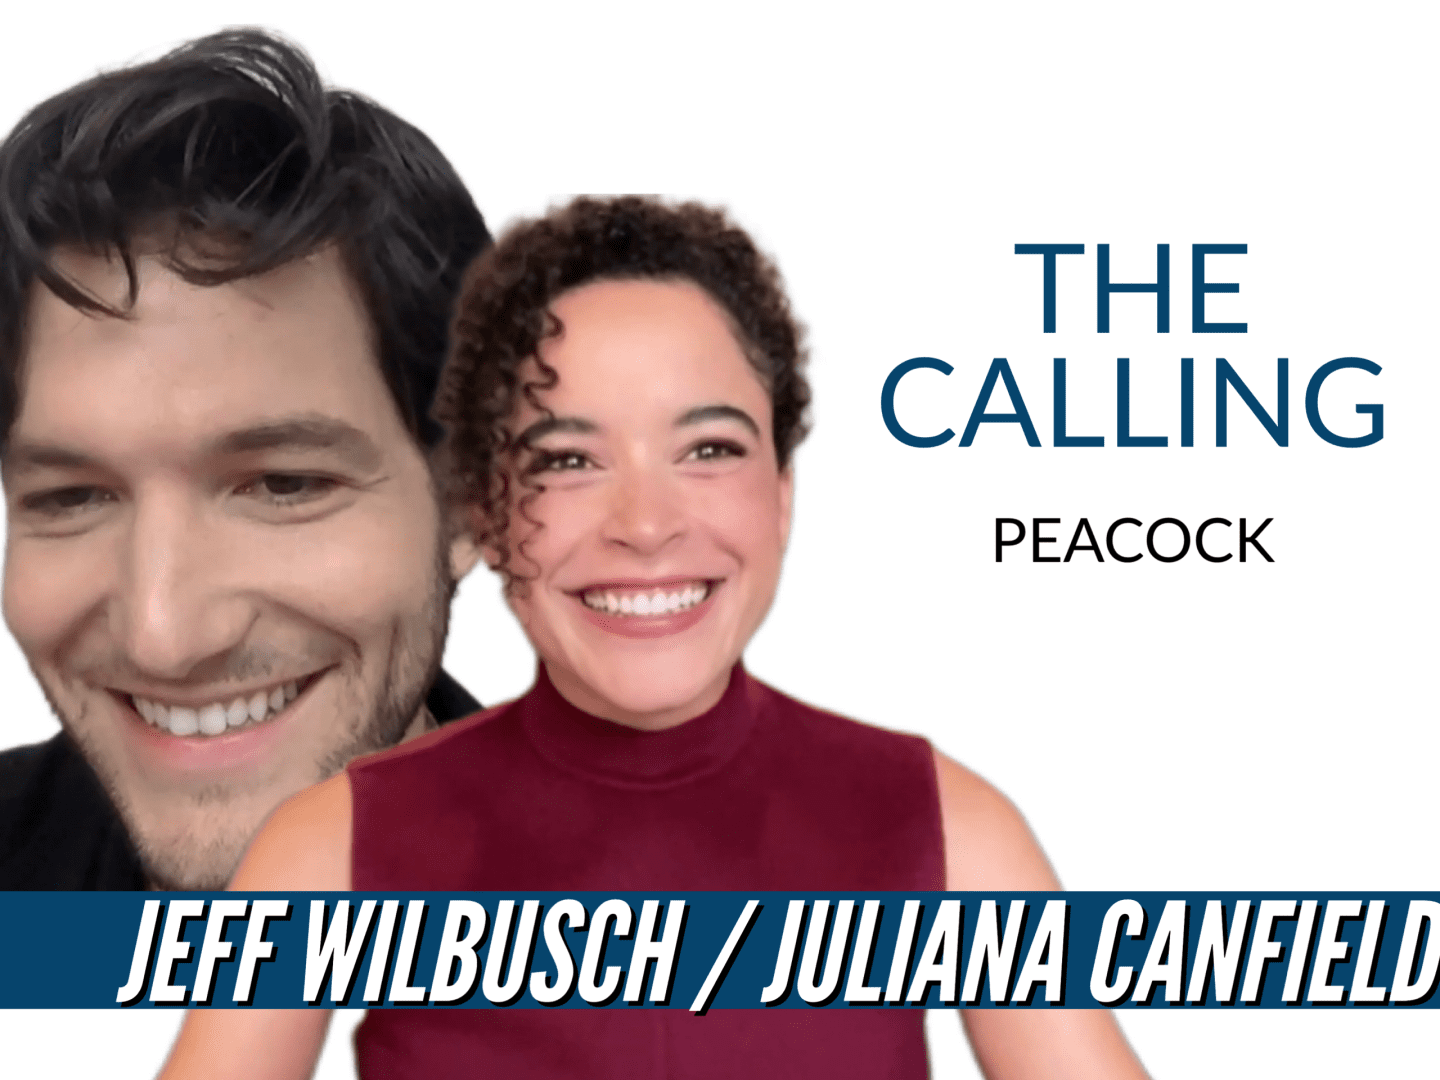 Jeff Wilbusch and Juliana Canfield star in the new crime drama 'The Calling'